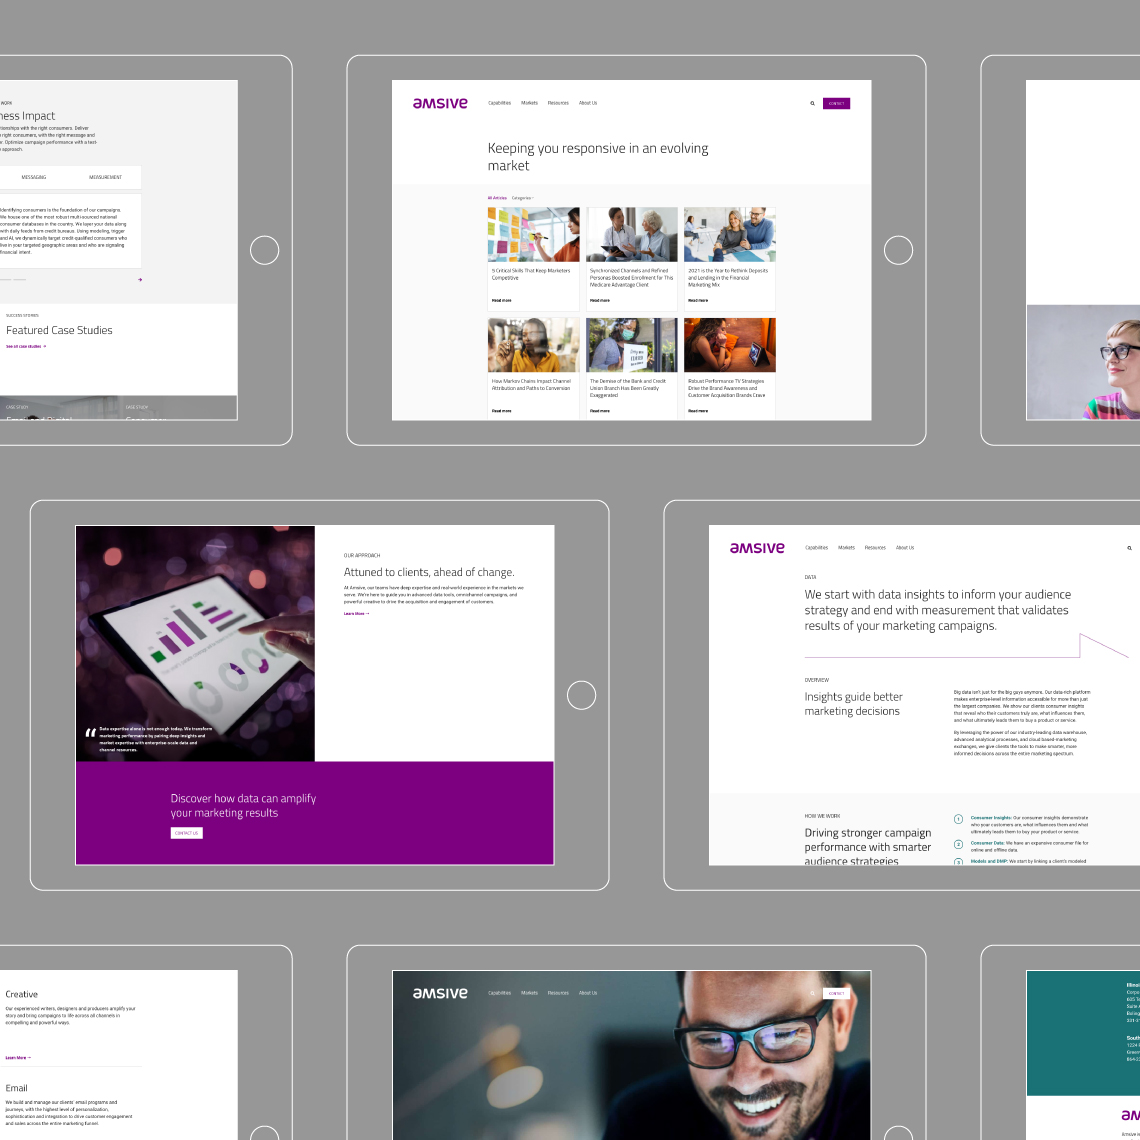 Examples of screen layouts designed for Amsive's new website